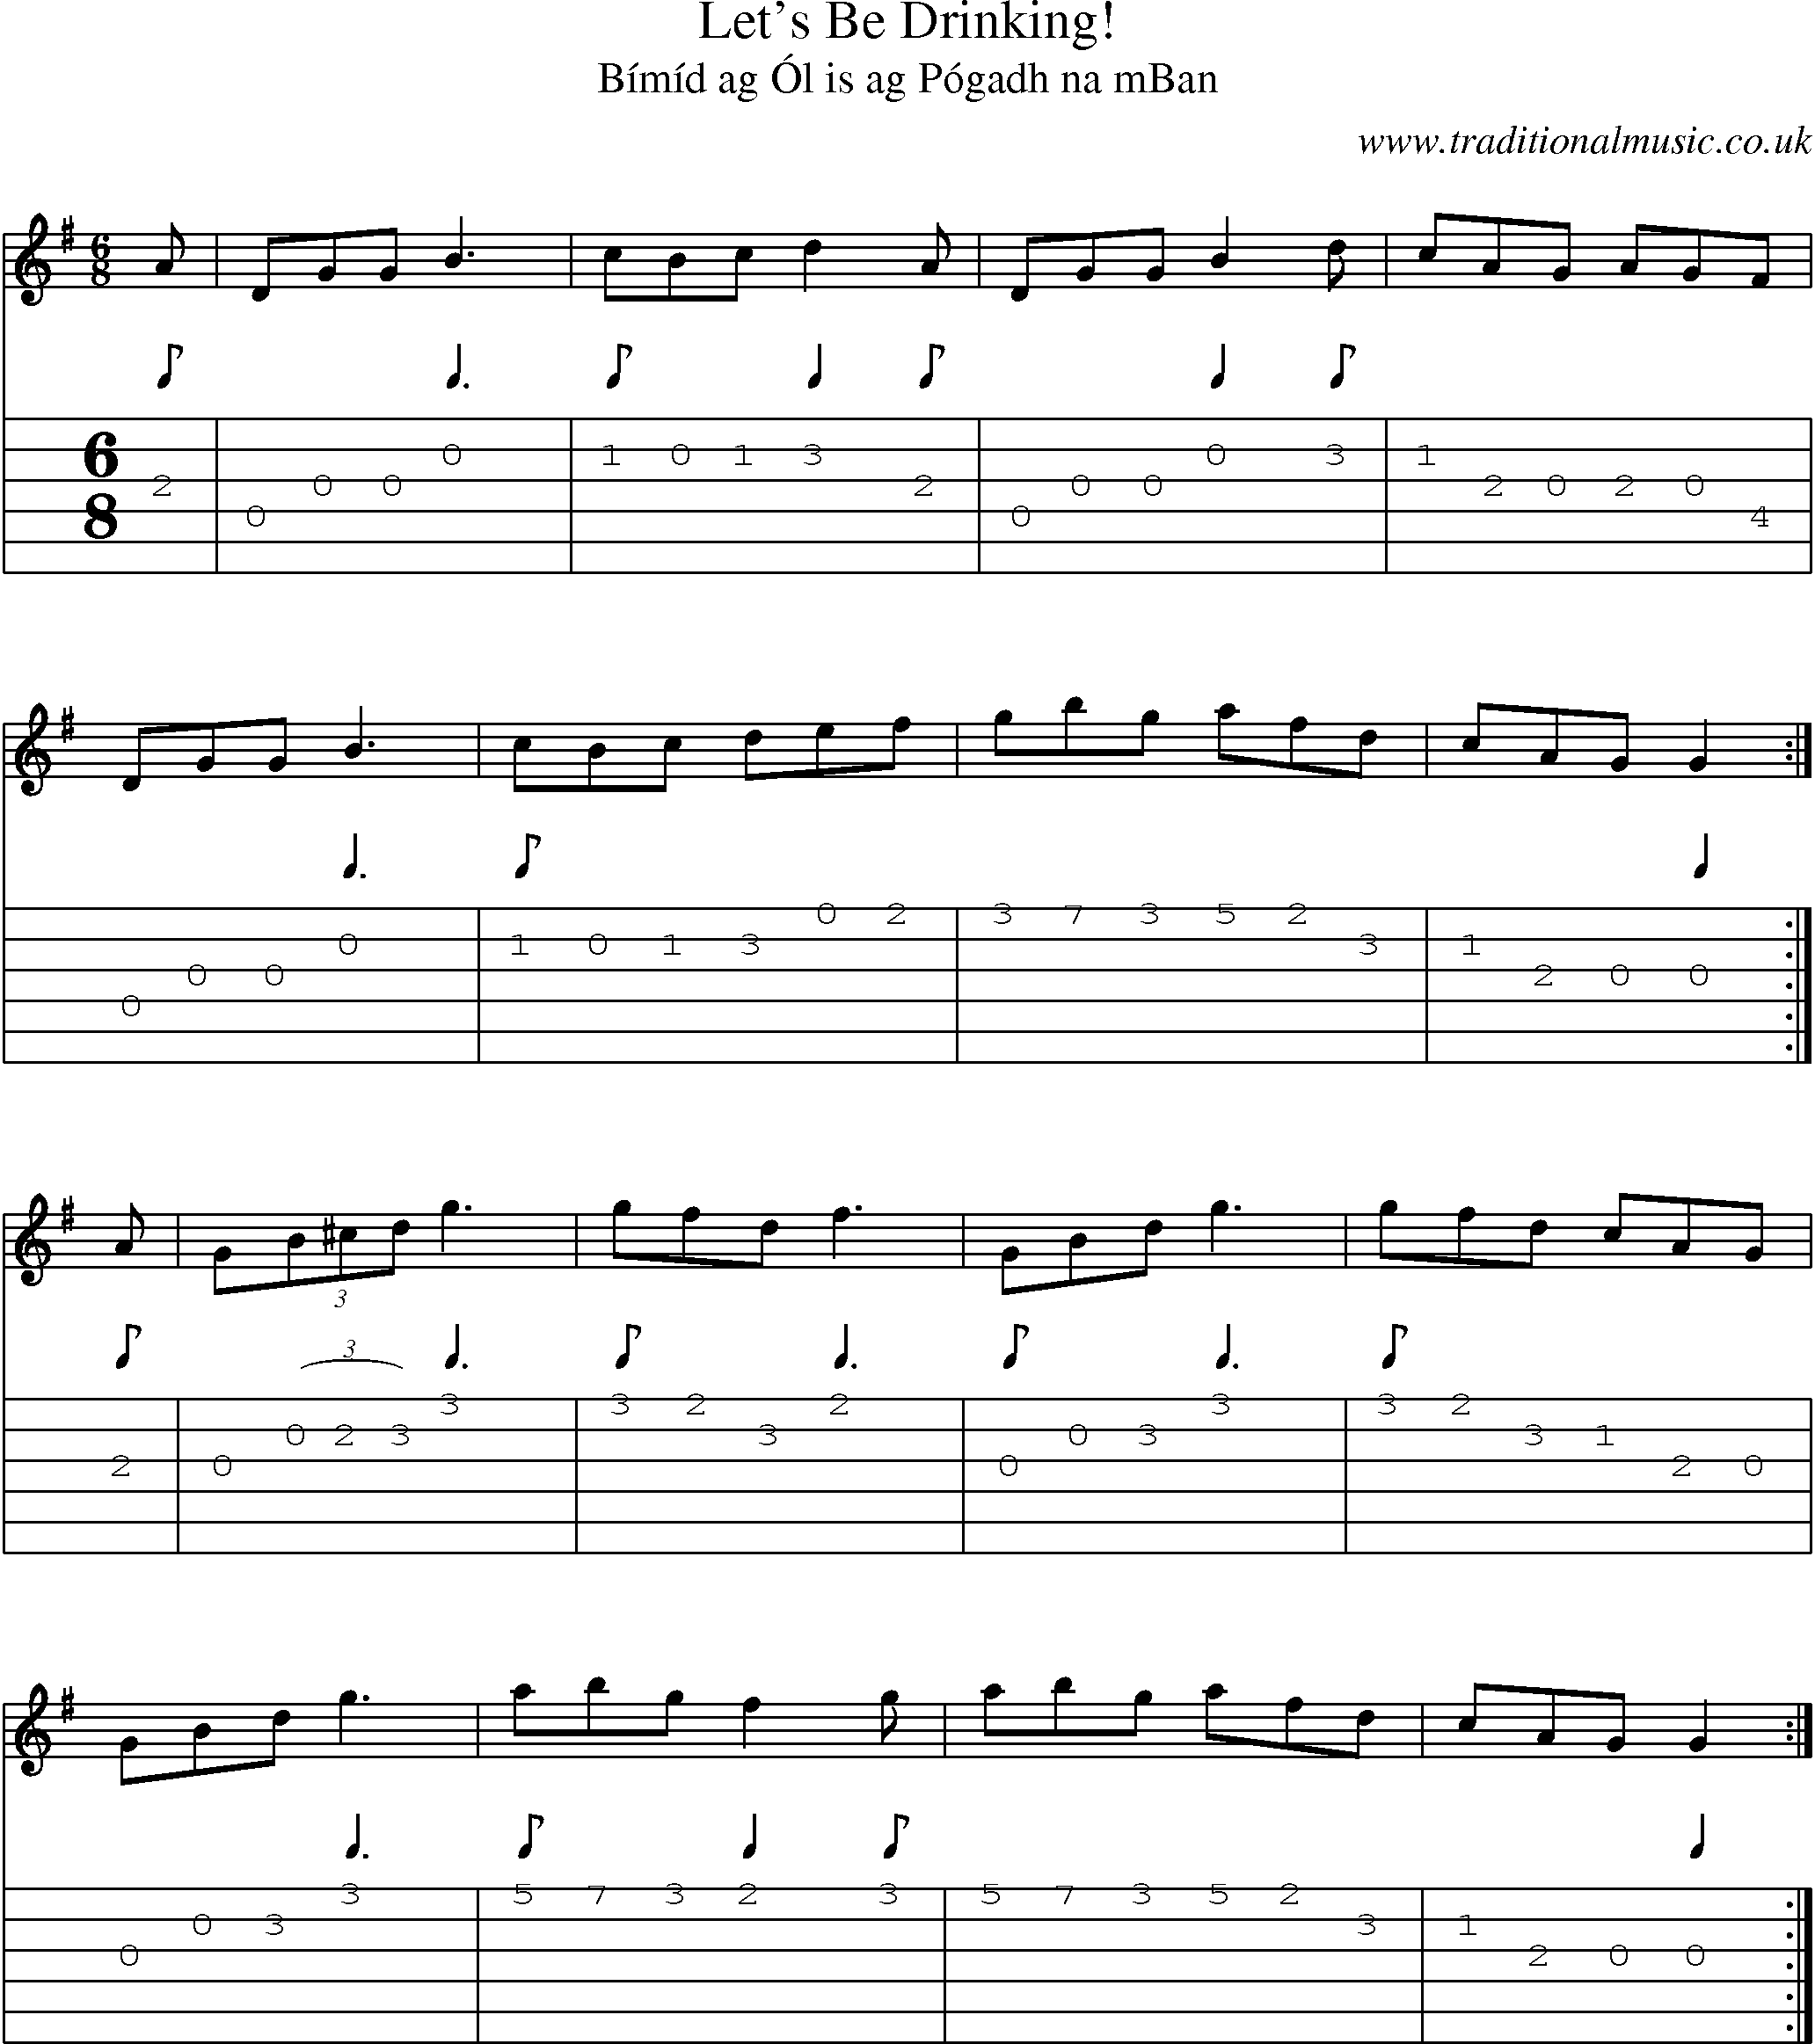 Music Score and Guitar Tabs for Lets Be Drinking!